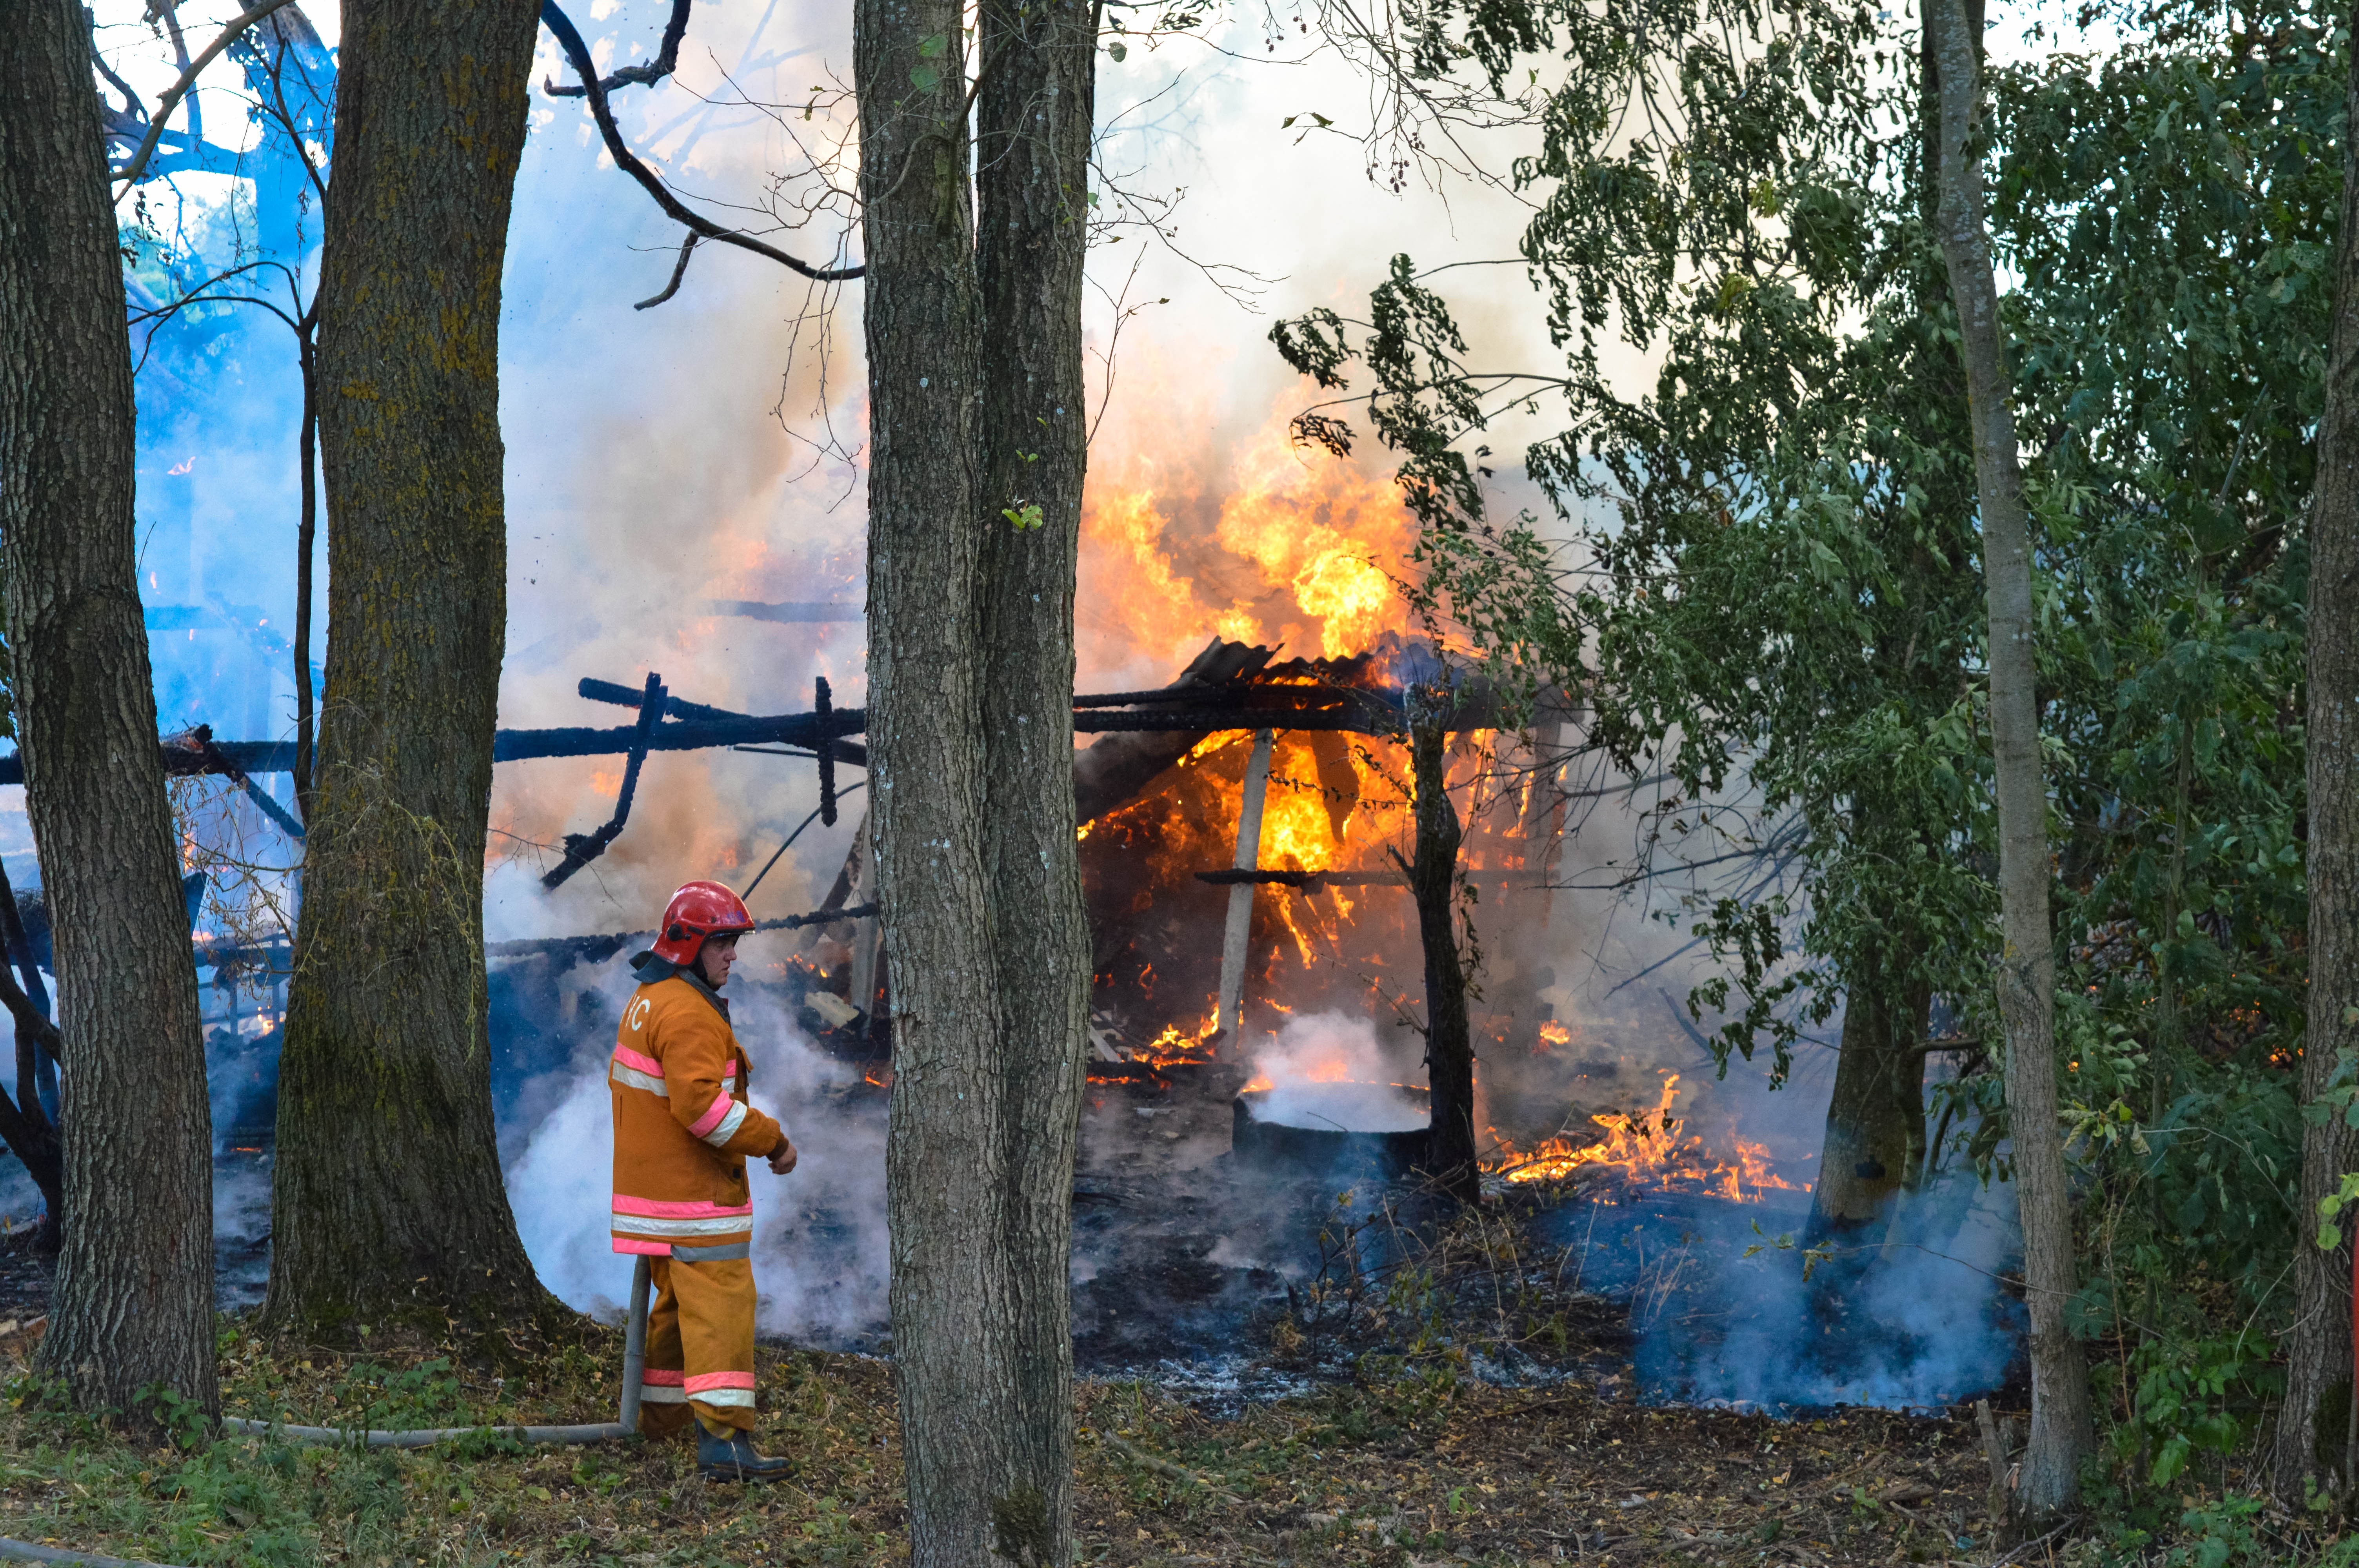 house on fire on a forested area with a fireman